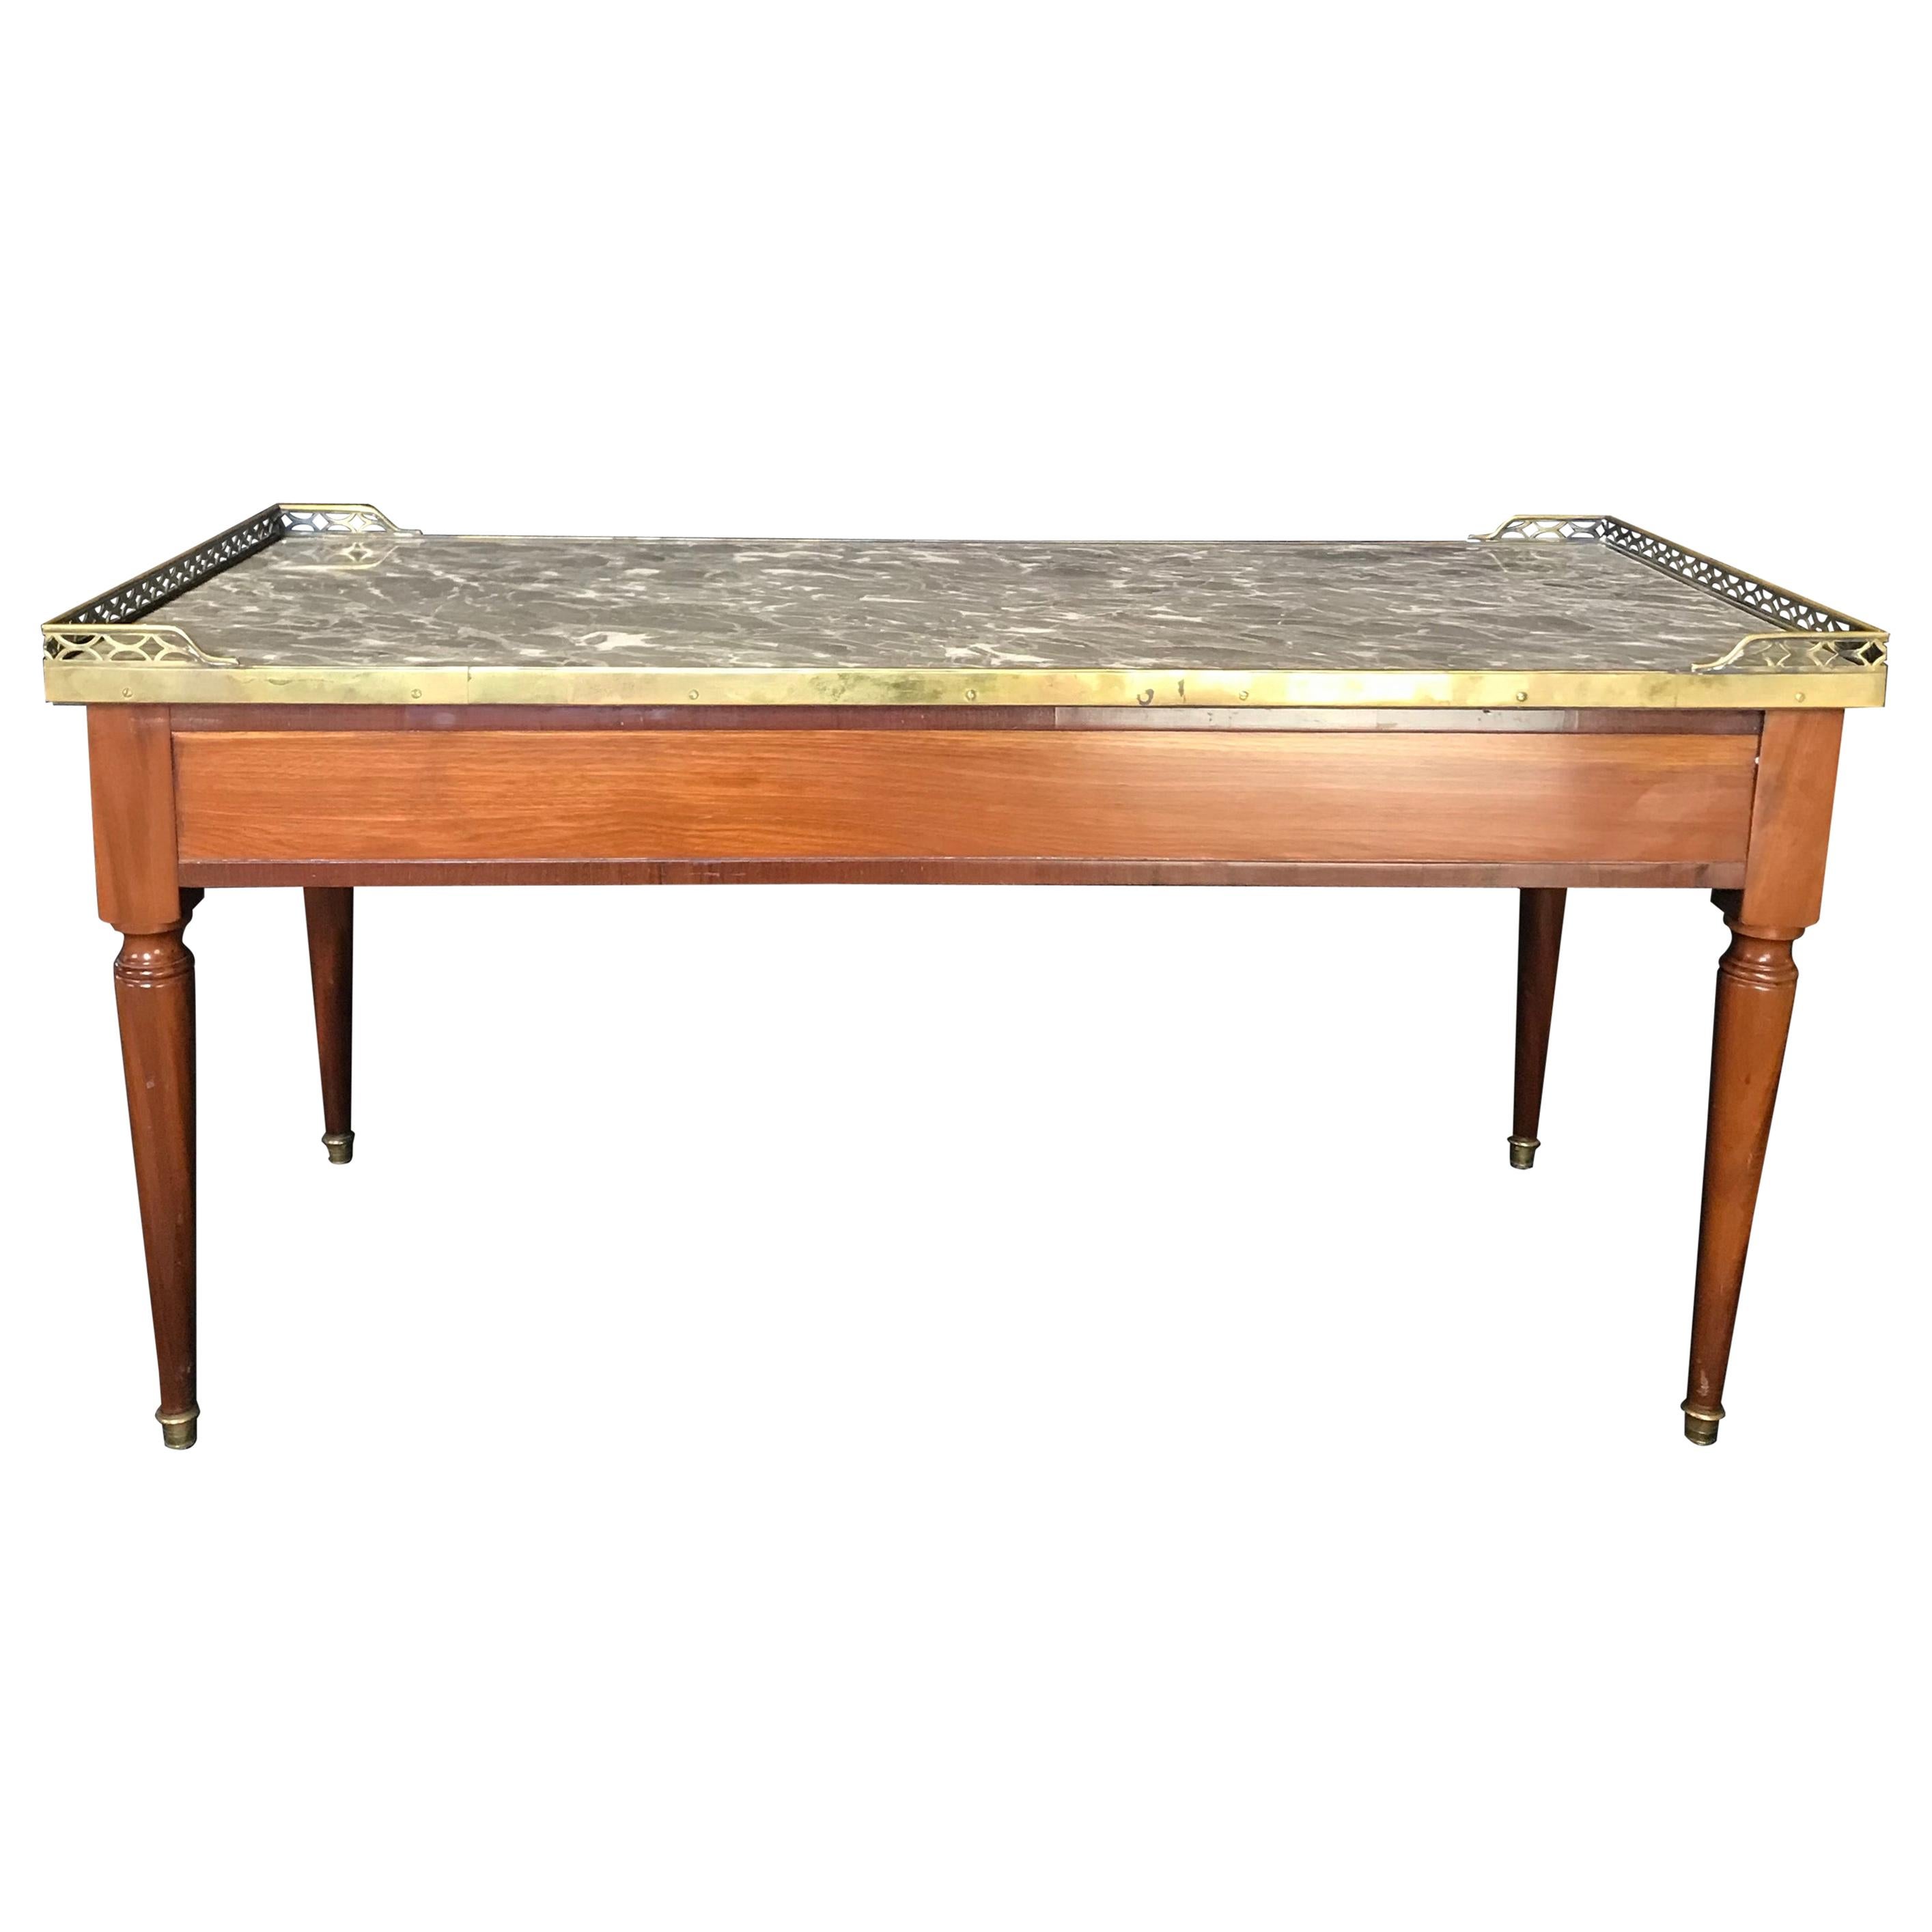 1920s French Louis XVI Style Walnut and Marble Coffee Table